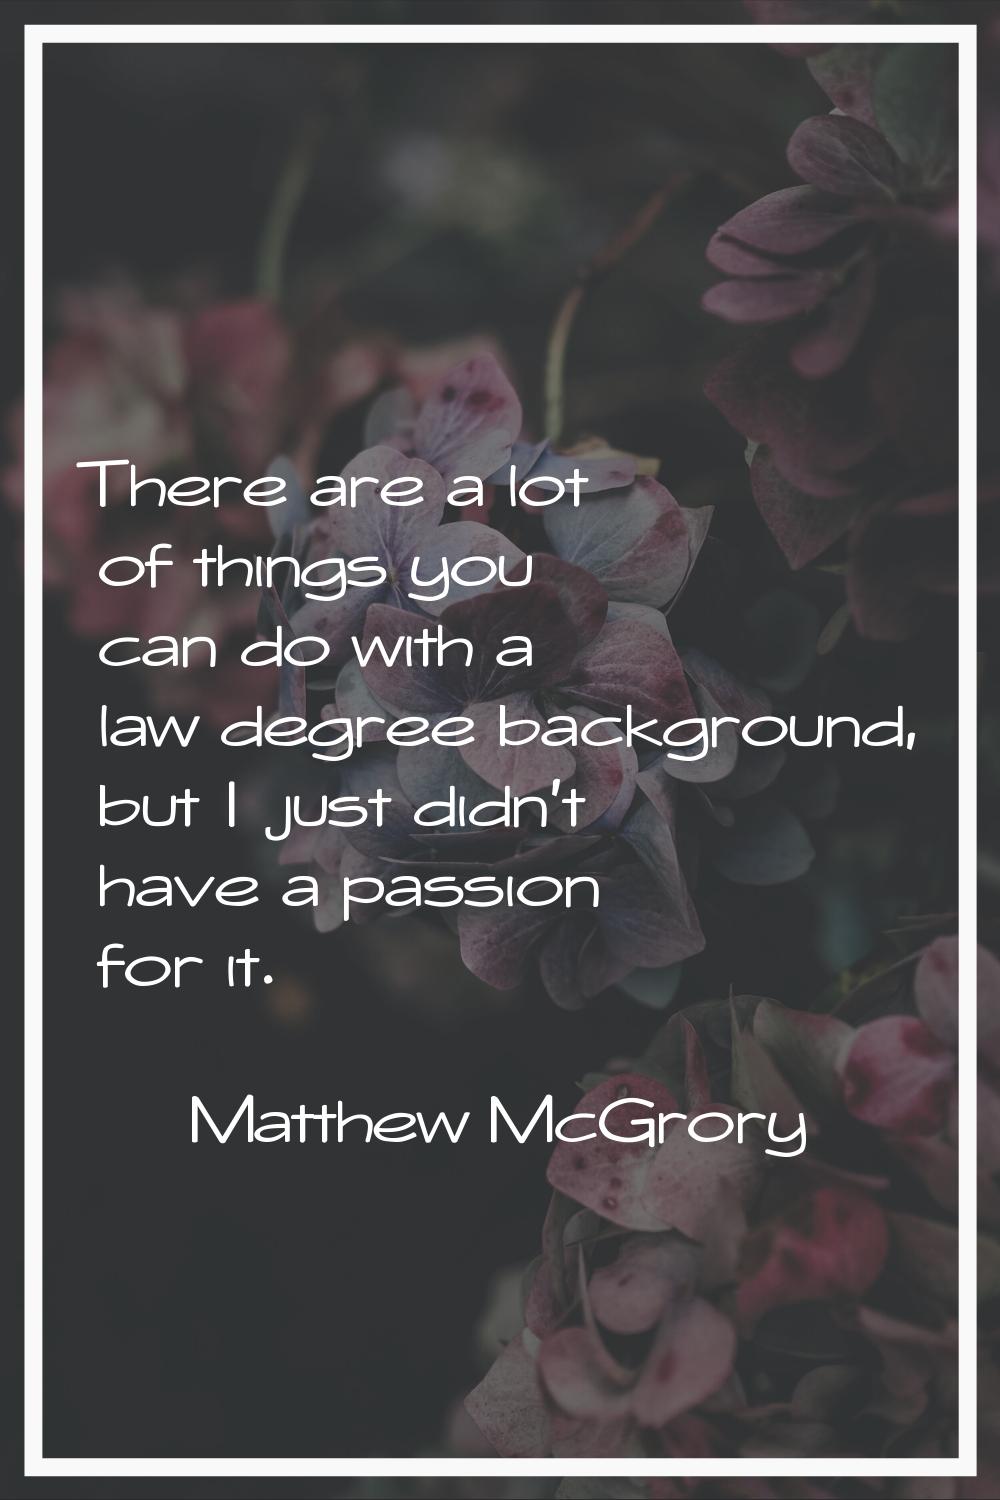 There are a lot of things you can do with a law degree background, but I just didn't have a passion